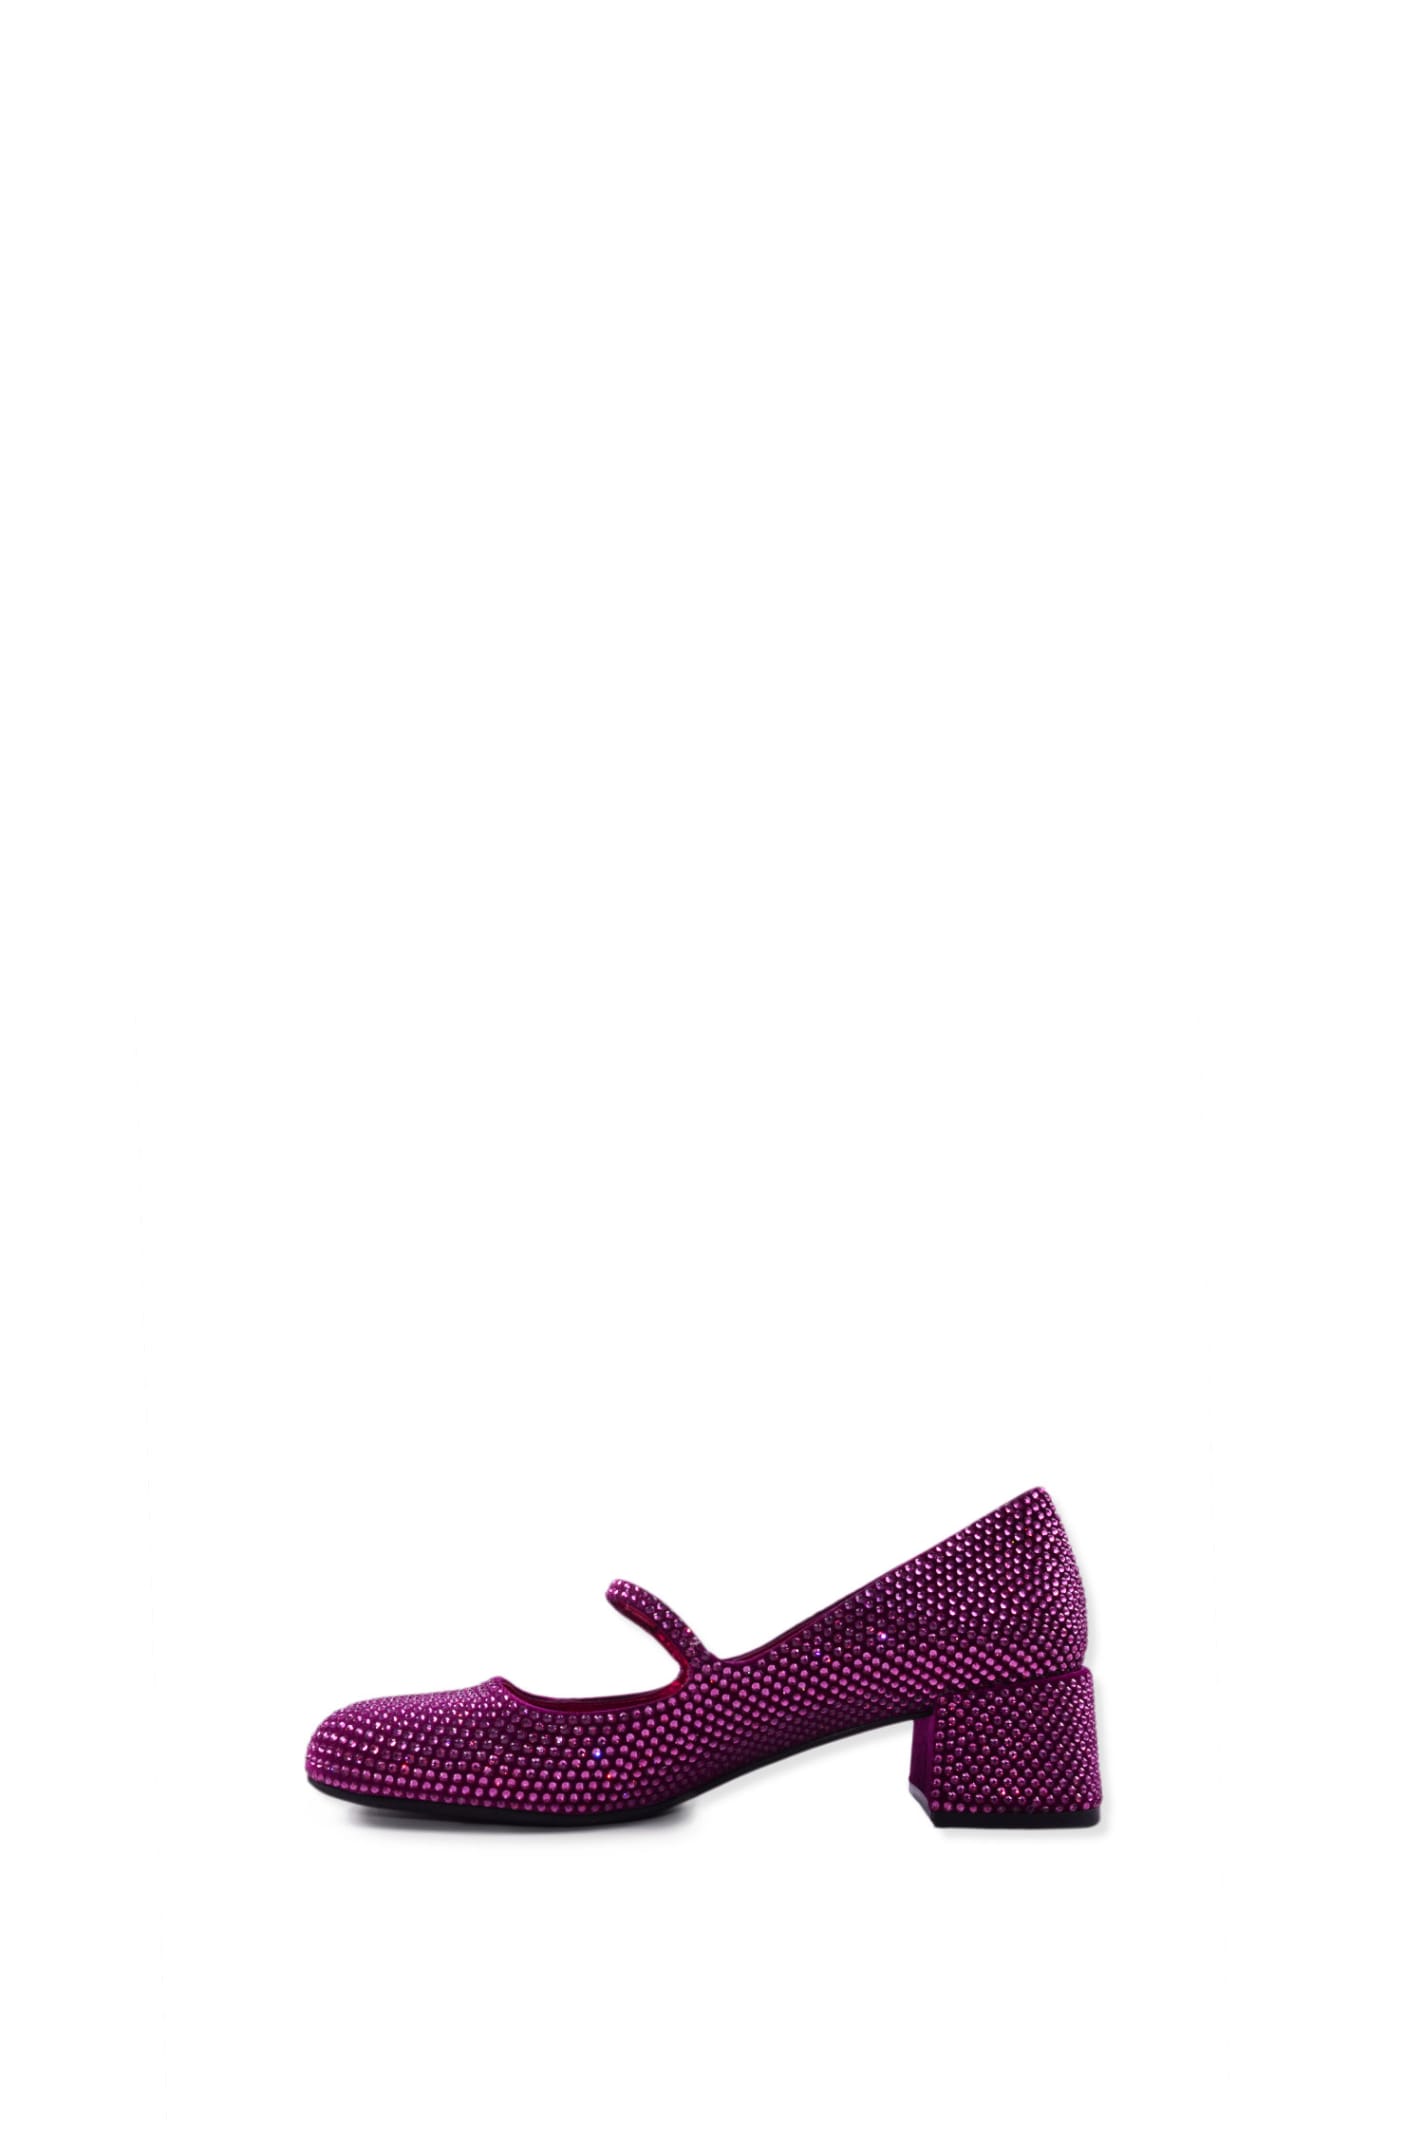 Shop Jeffrey Campbell Shoe With Heel And Diamonds In Fuchsia